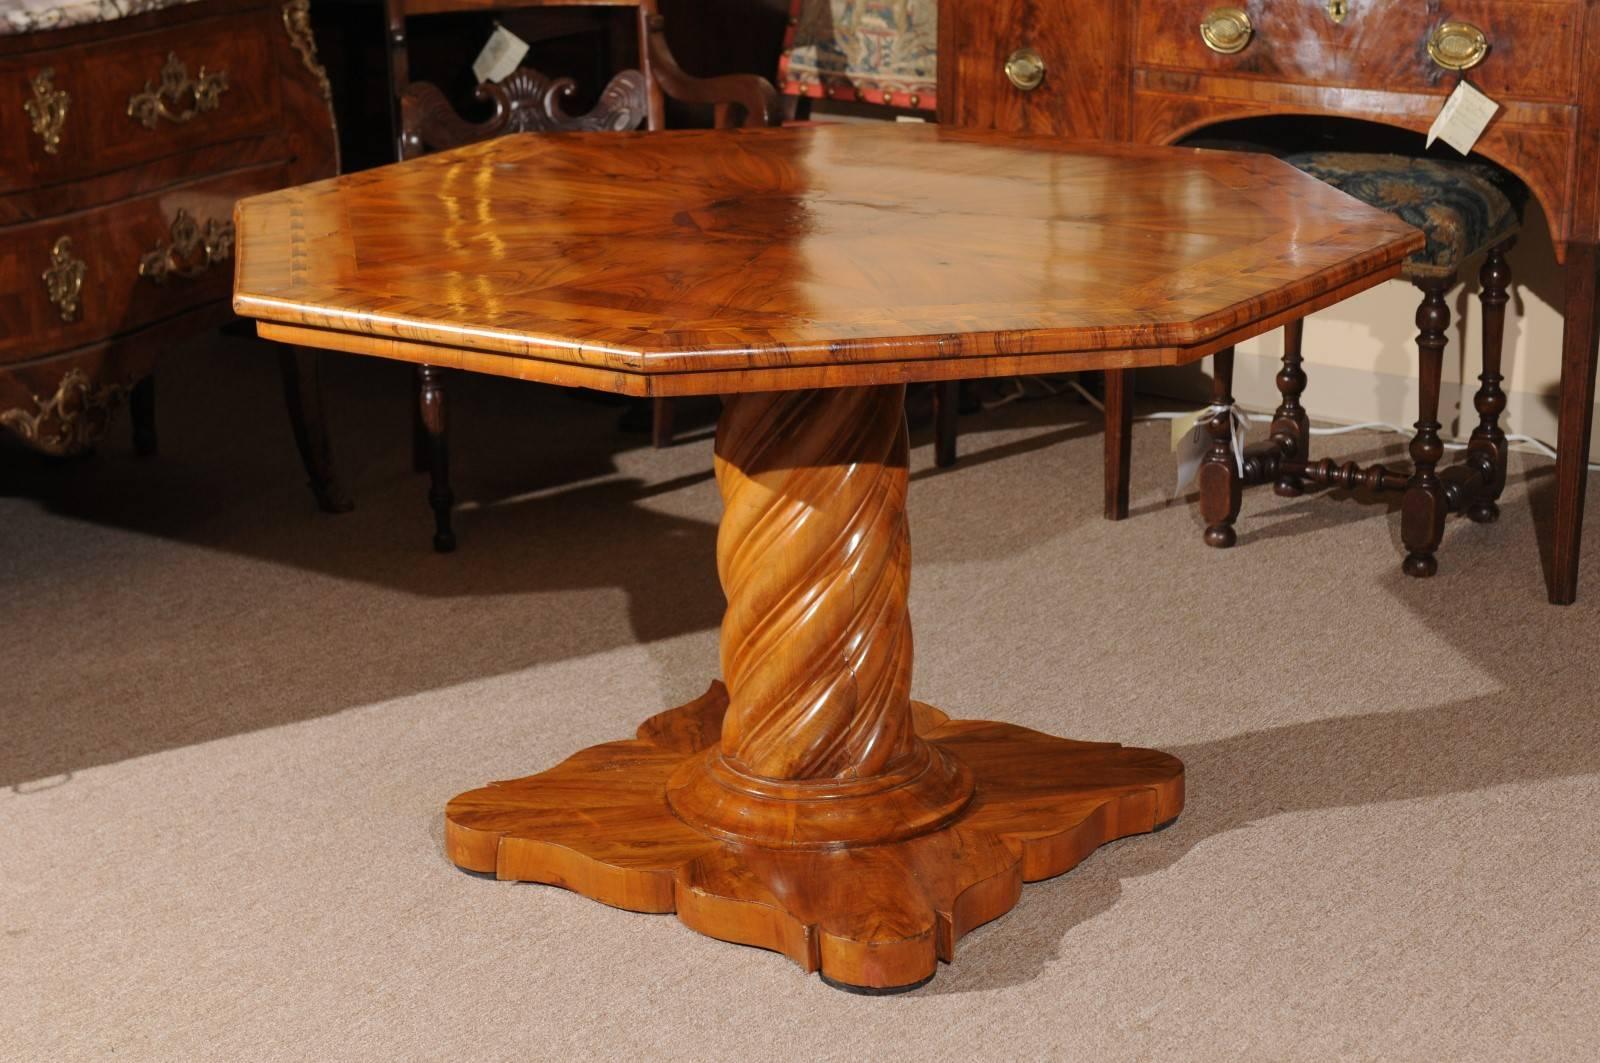 Octagonal shaped neoclassical style inlaid walnut center table with barley twist pedestal base, Italy 19th century.